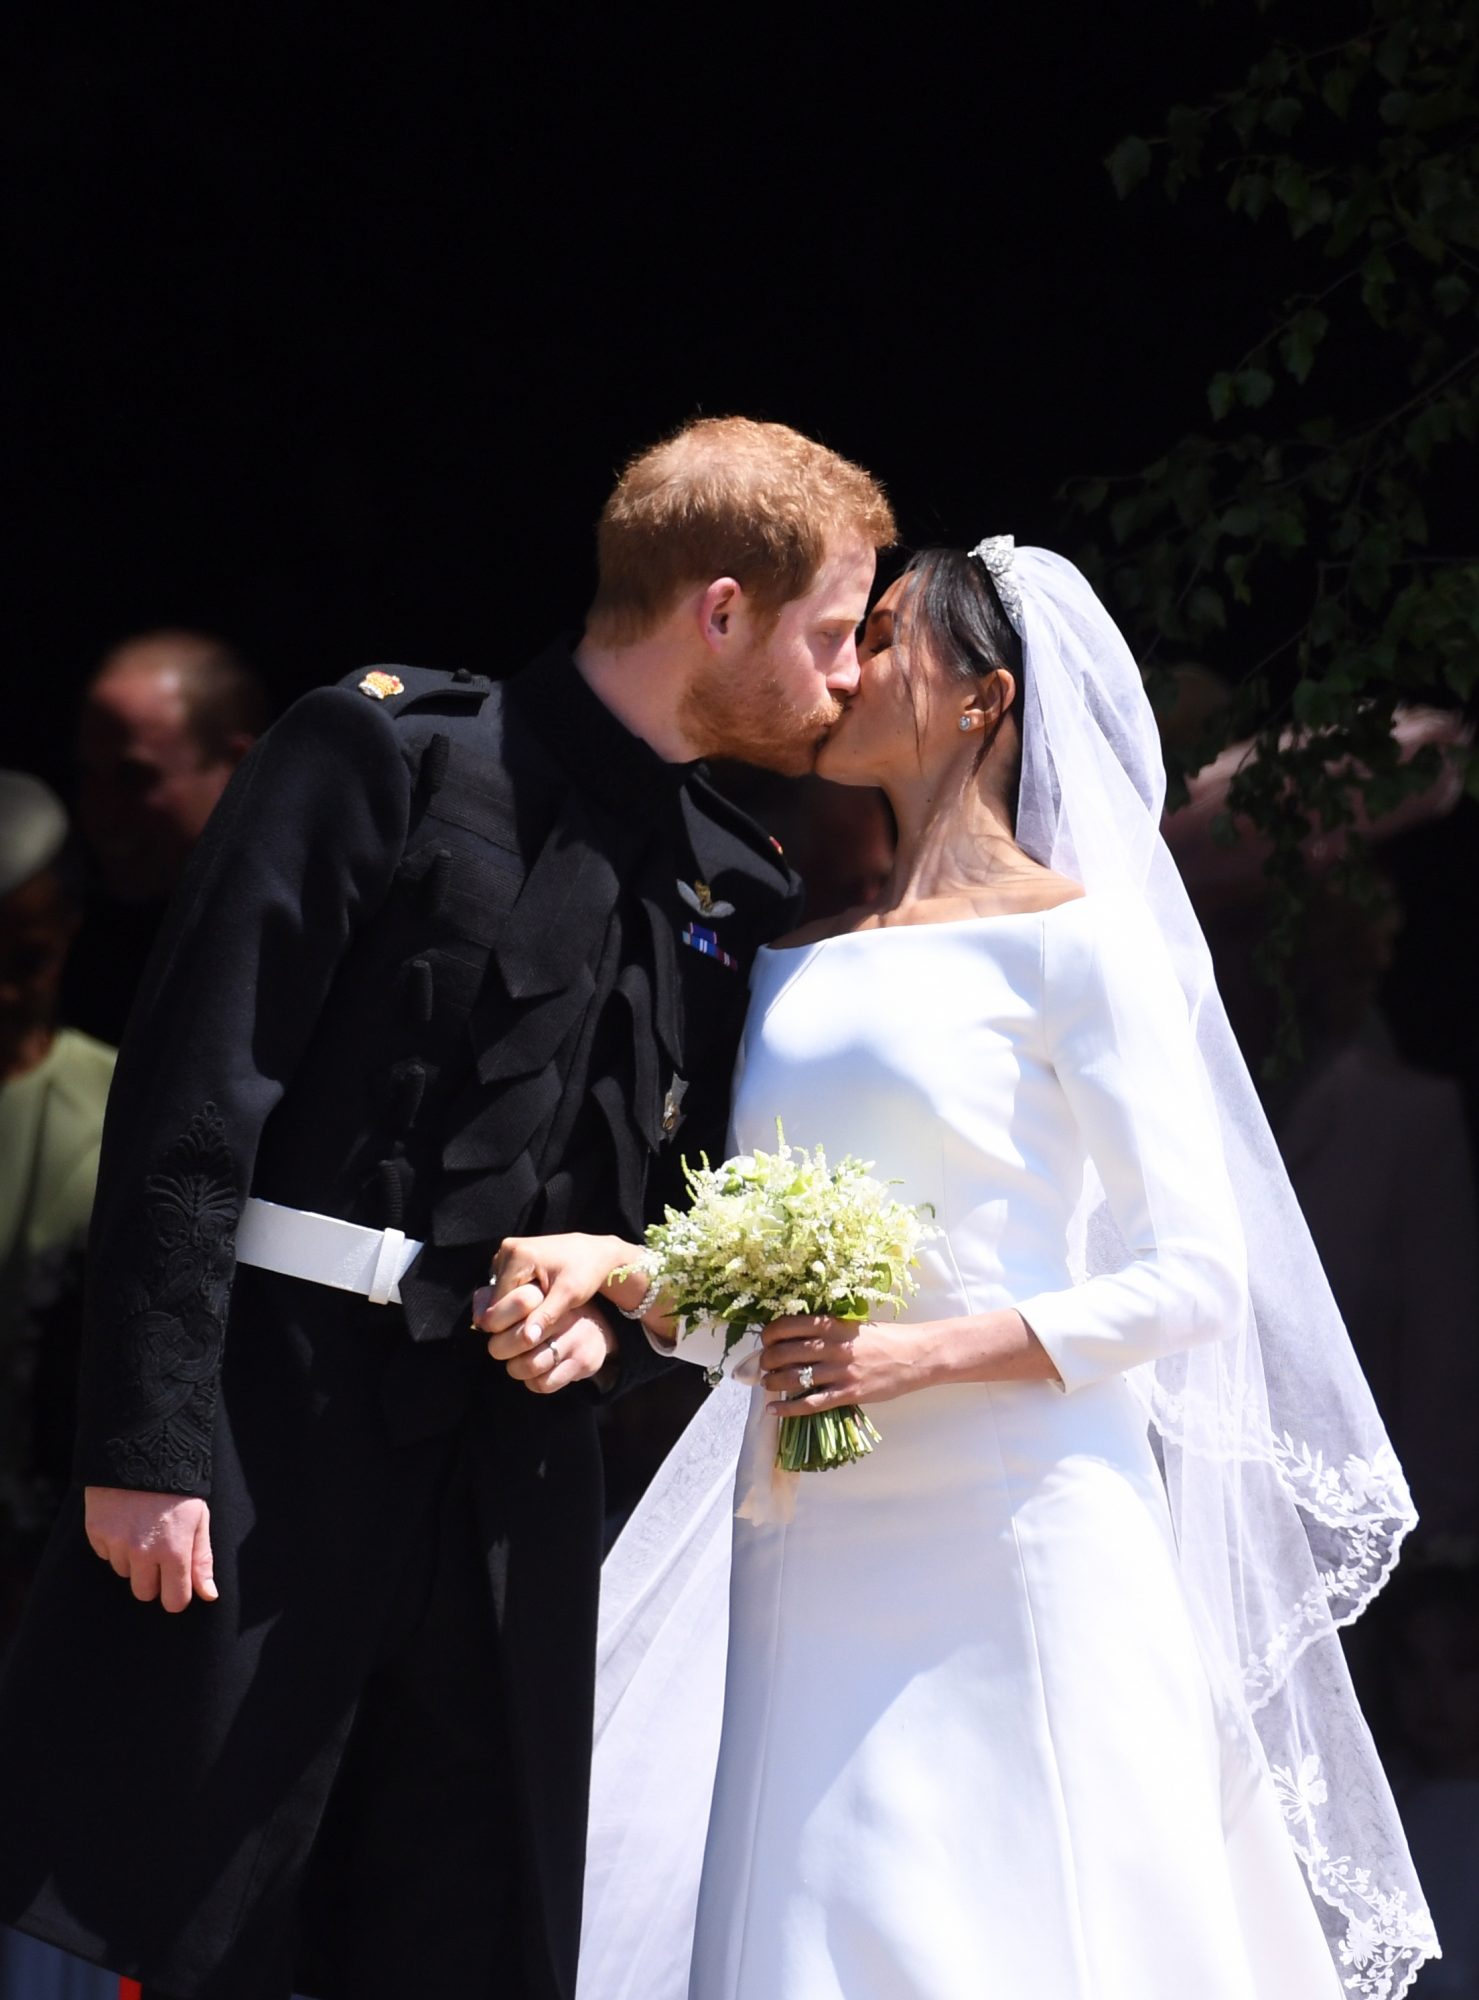 Royal Wedding of Prince Harry and Meghan Markle in Windsor, United Kingdom - 19 May 2018